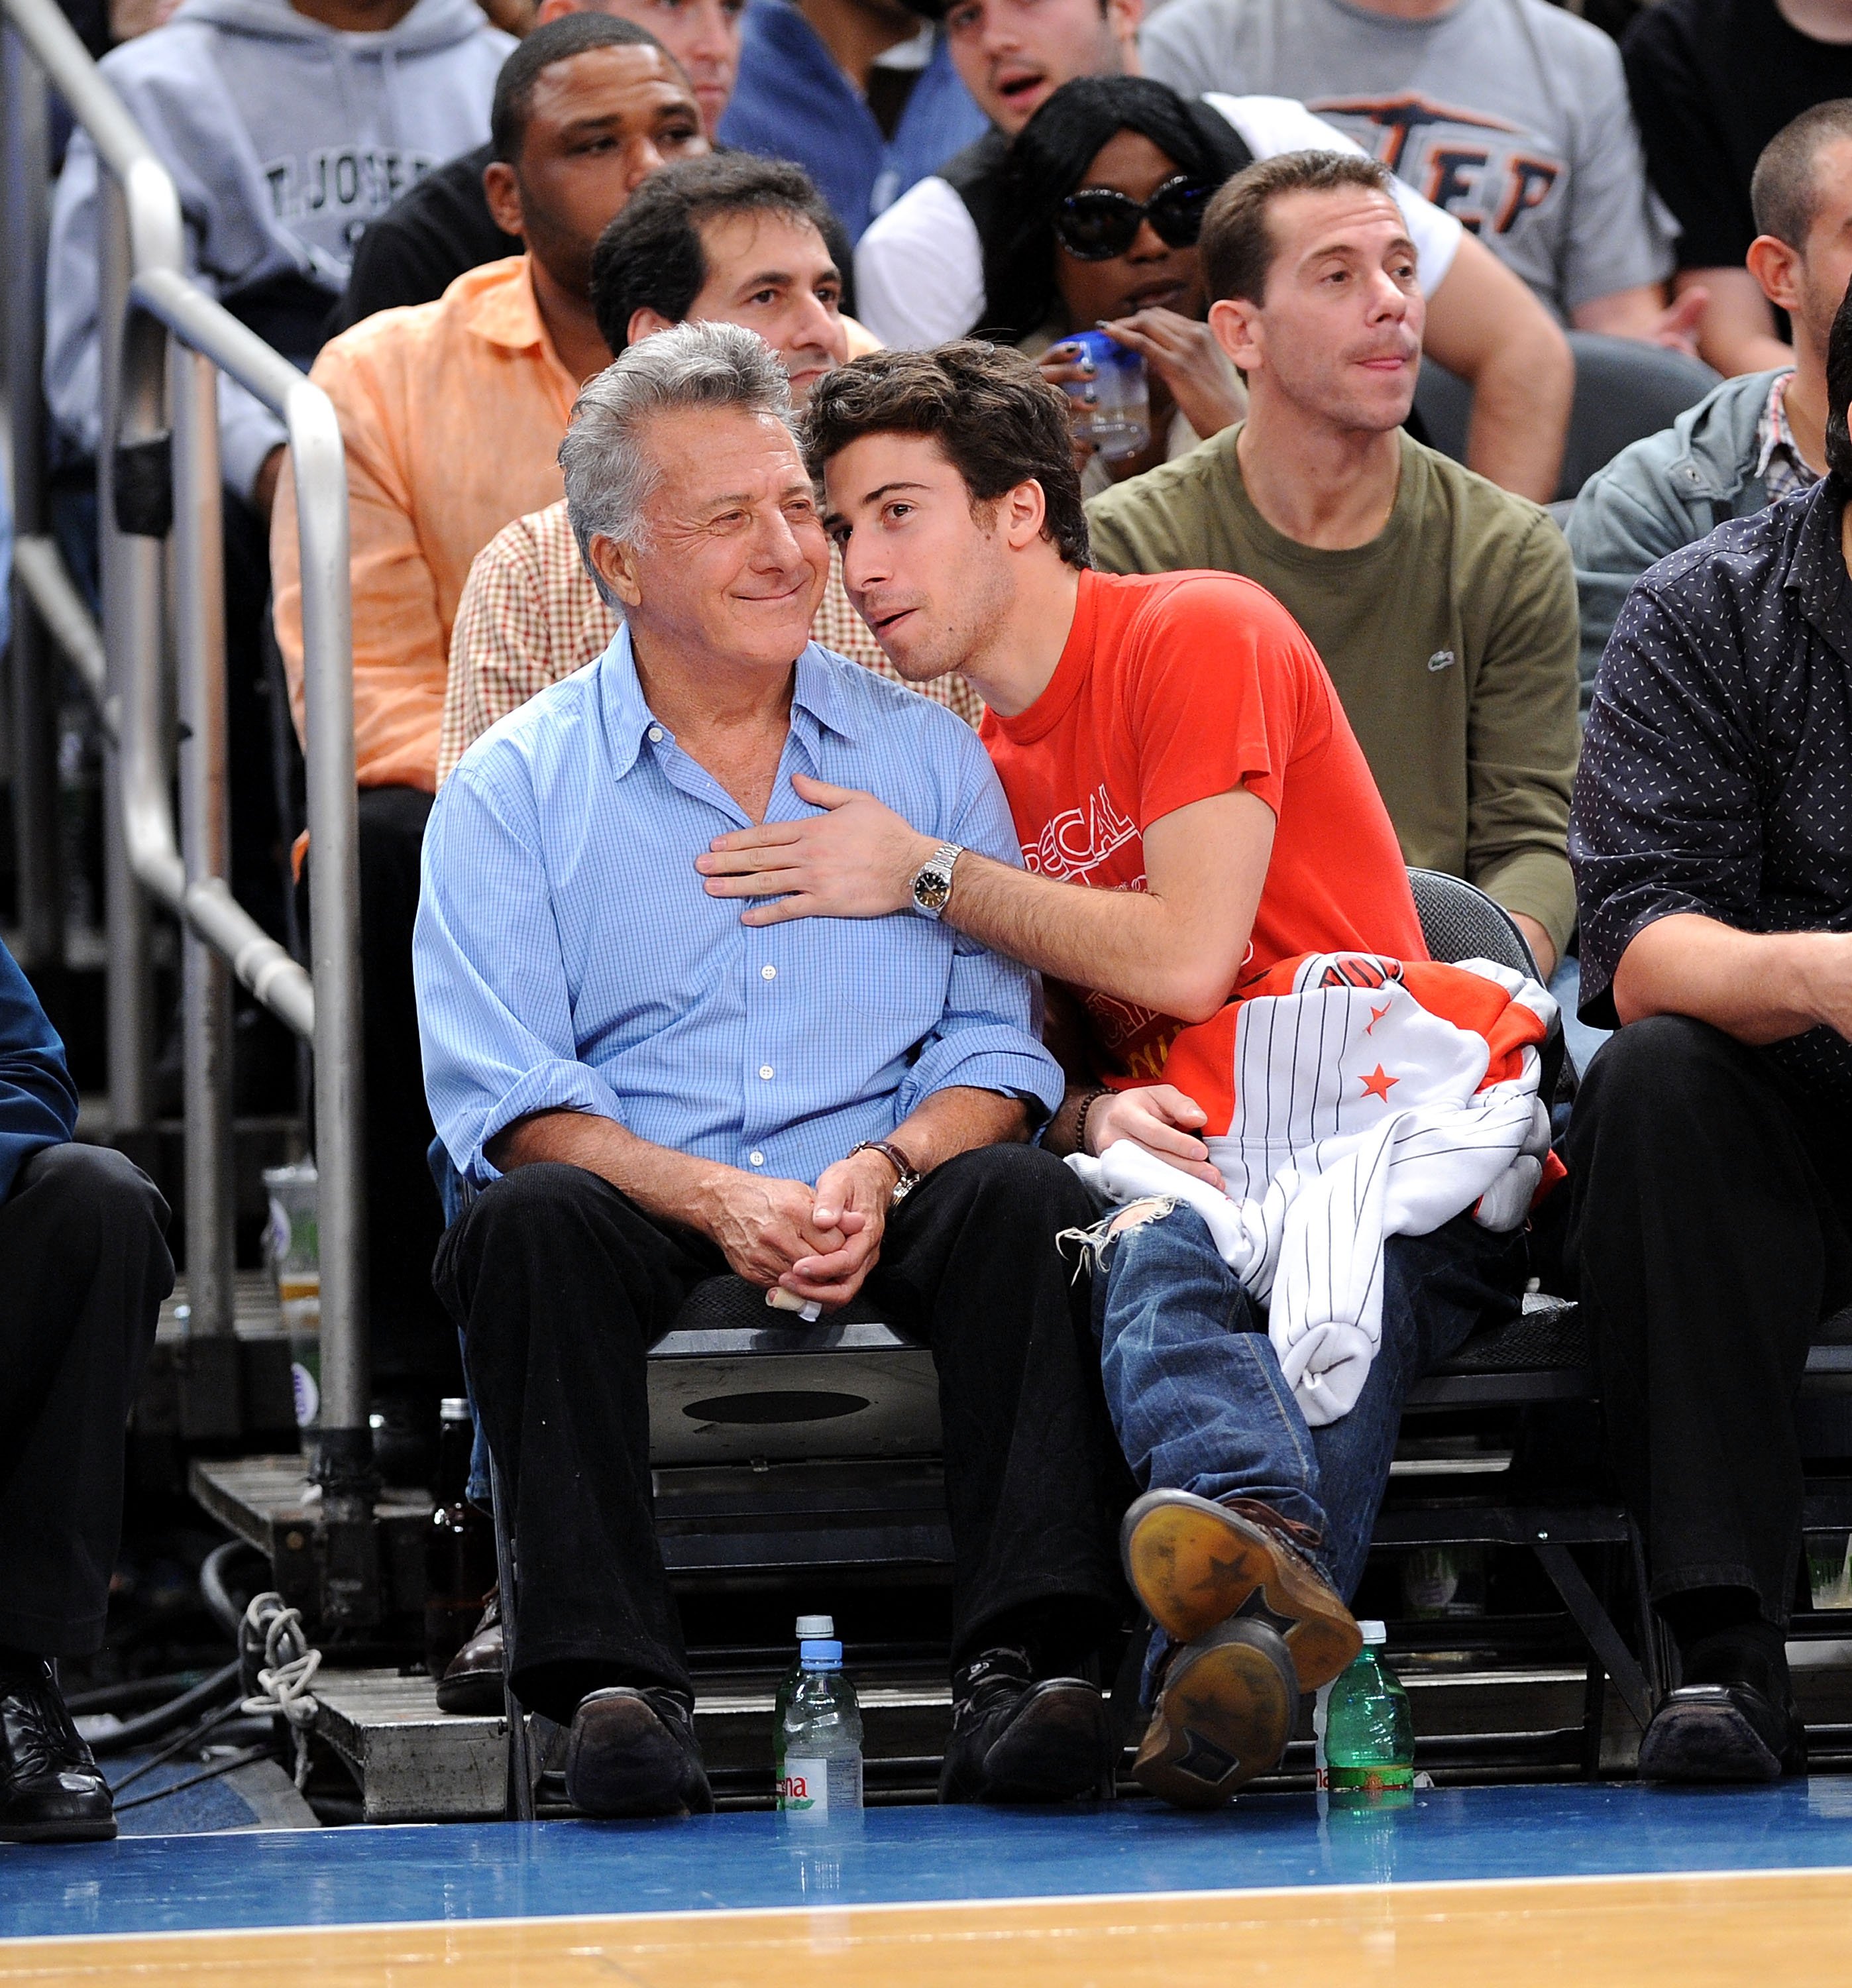 Dustin and Jake Hoffman at the Philadelphia 76ers game against the New York Knicks at Madison Square Garden on October 31, 2009, in New York City | Source: Getty Images